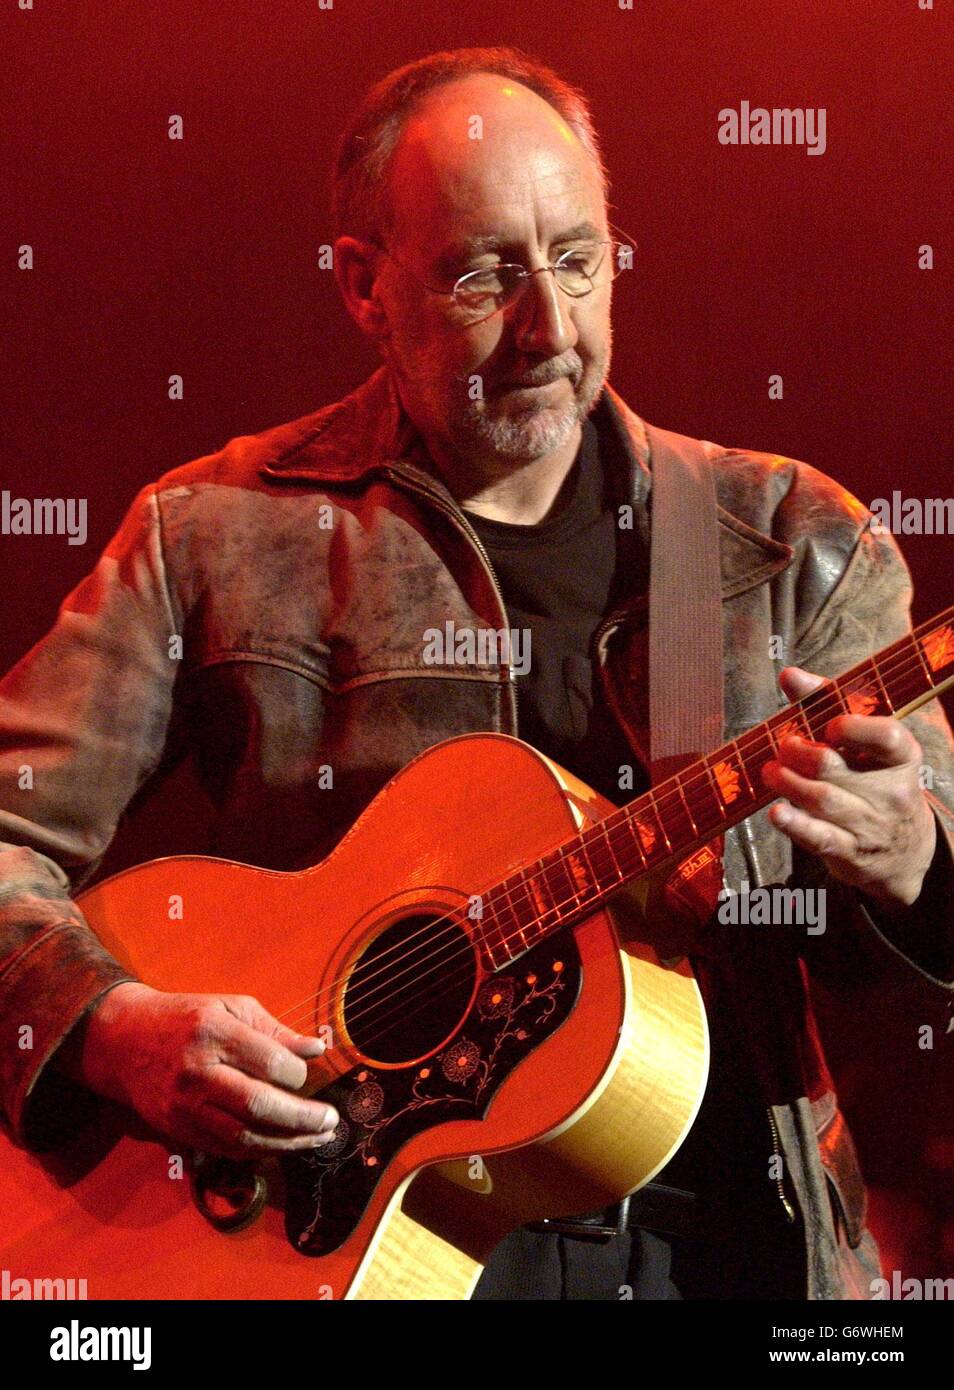 Pete Townshend performs on the stage during Ronnie Lane Tribute concert at The Royal Albert Hall in central London. Stock Photo